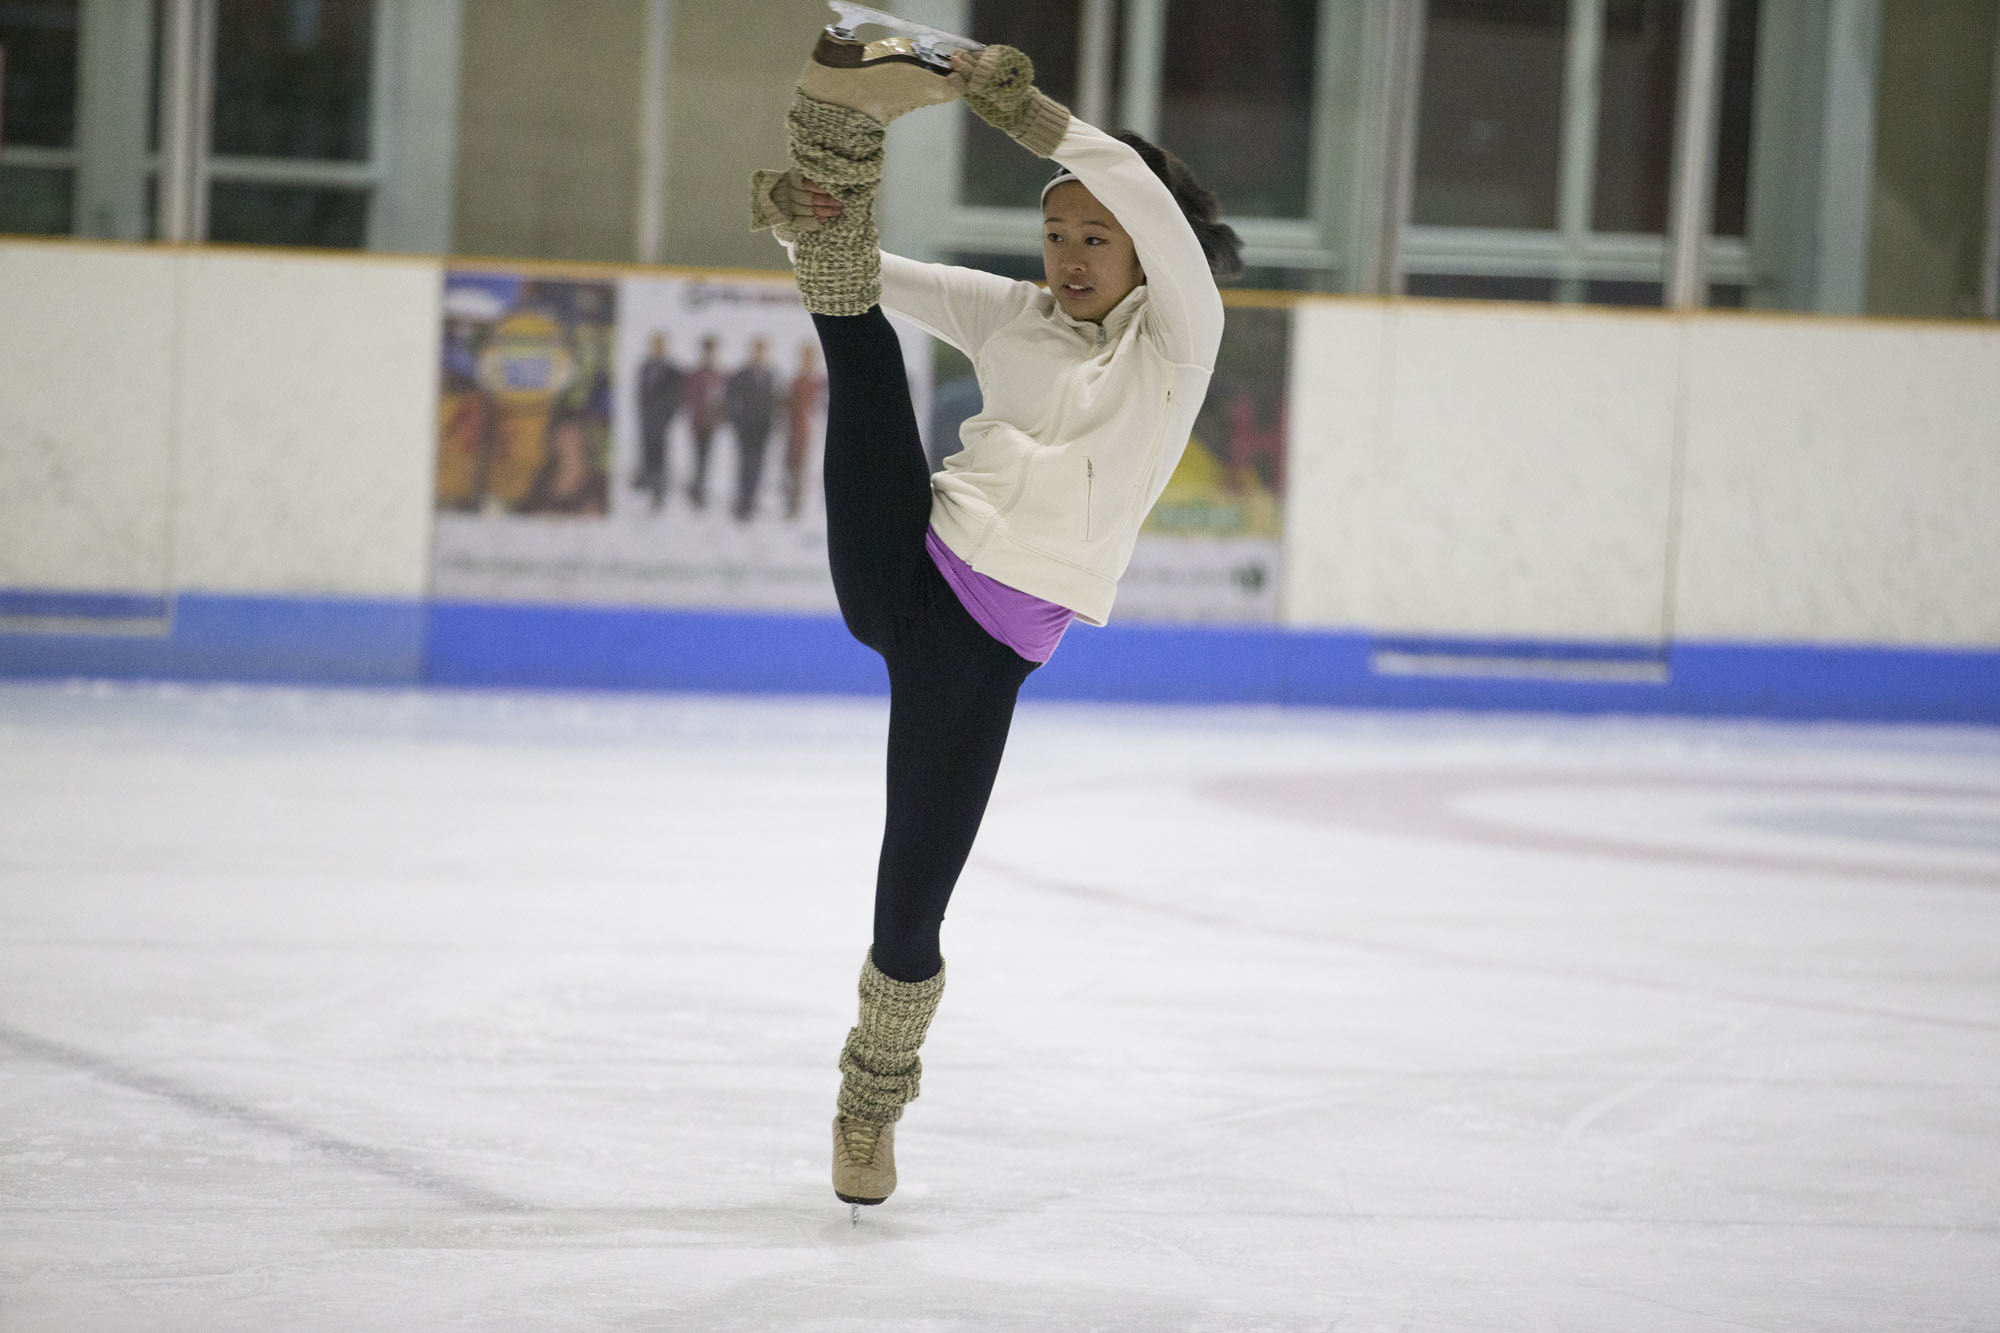 Slater works with skaters to better prepare their bodies for the many unusual bends and twists demanded by the sport. Here UVA club skater Marcha Kiatrungrit practices an upright grab spin.